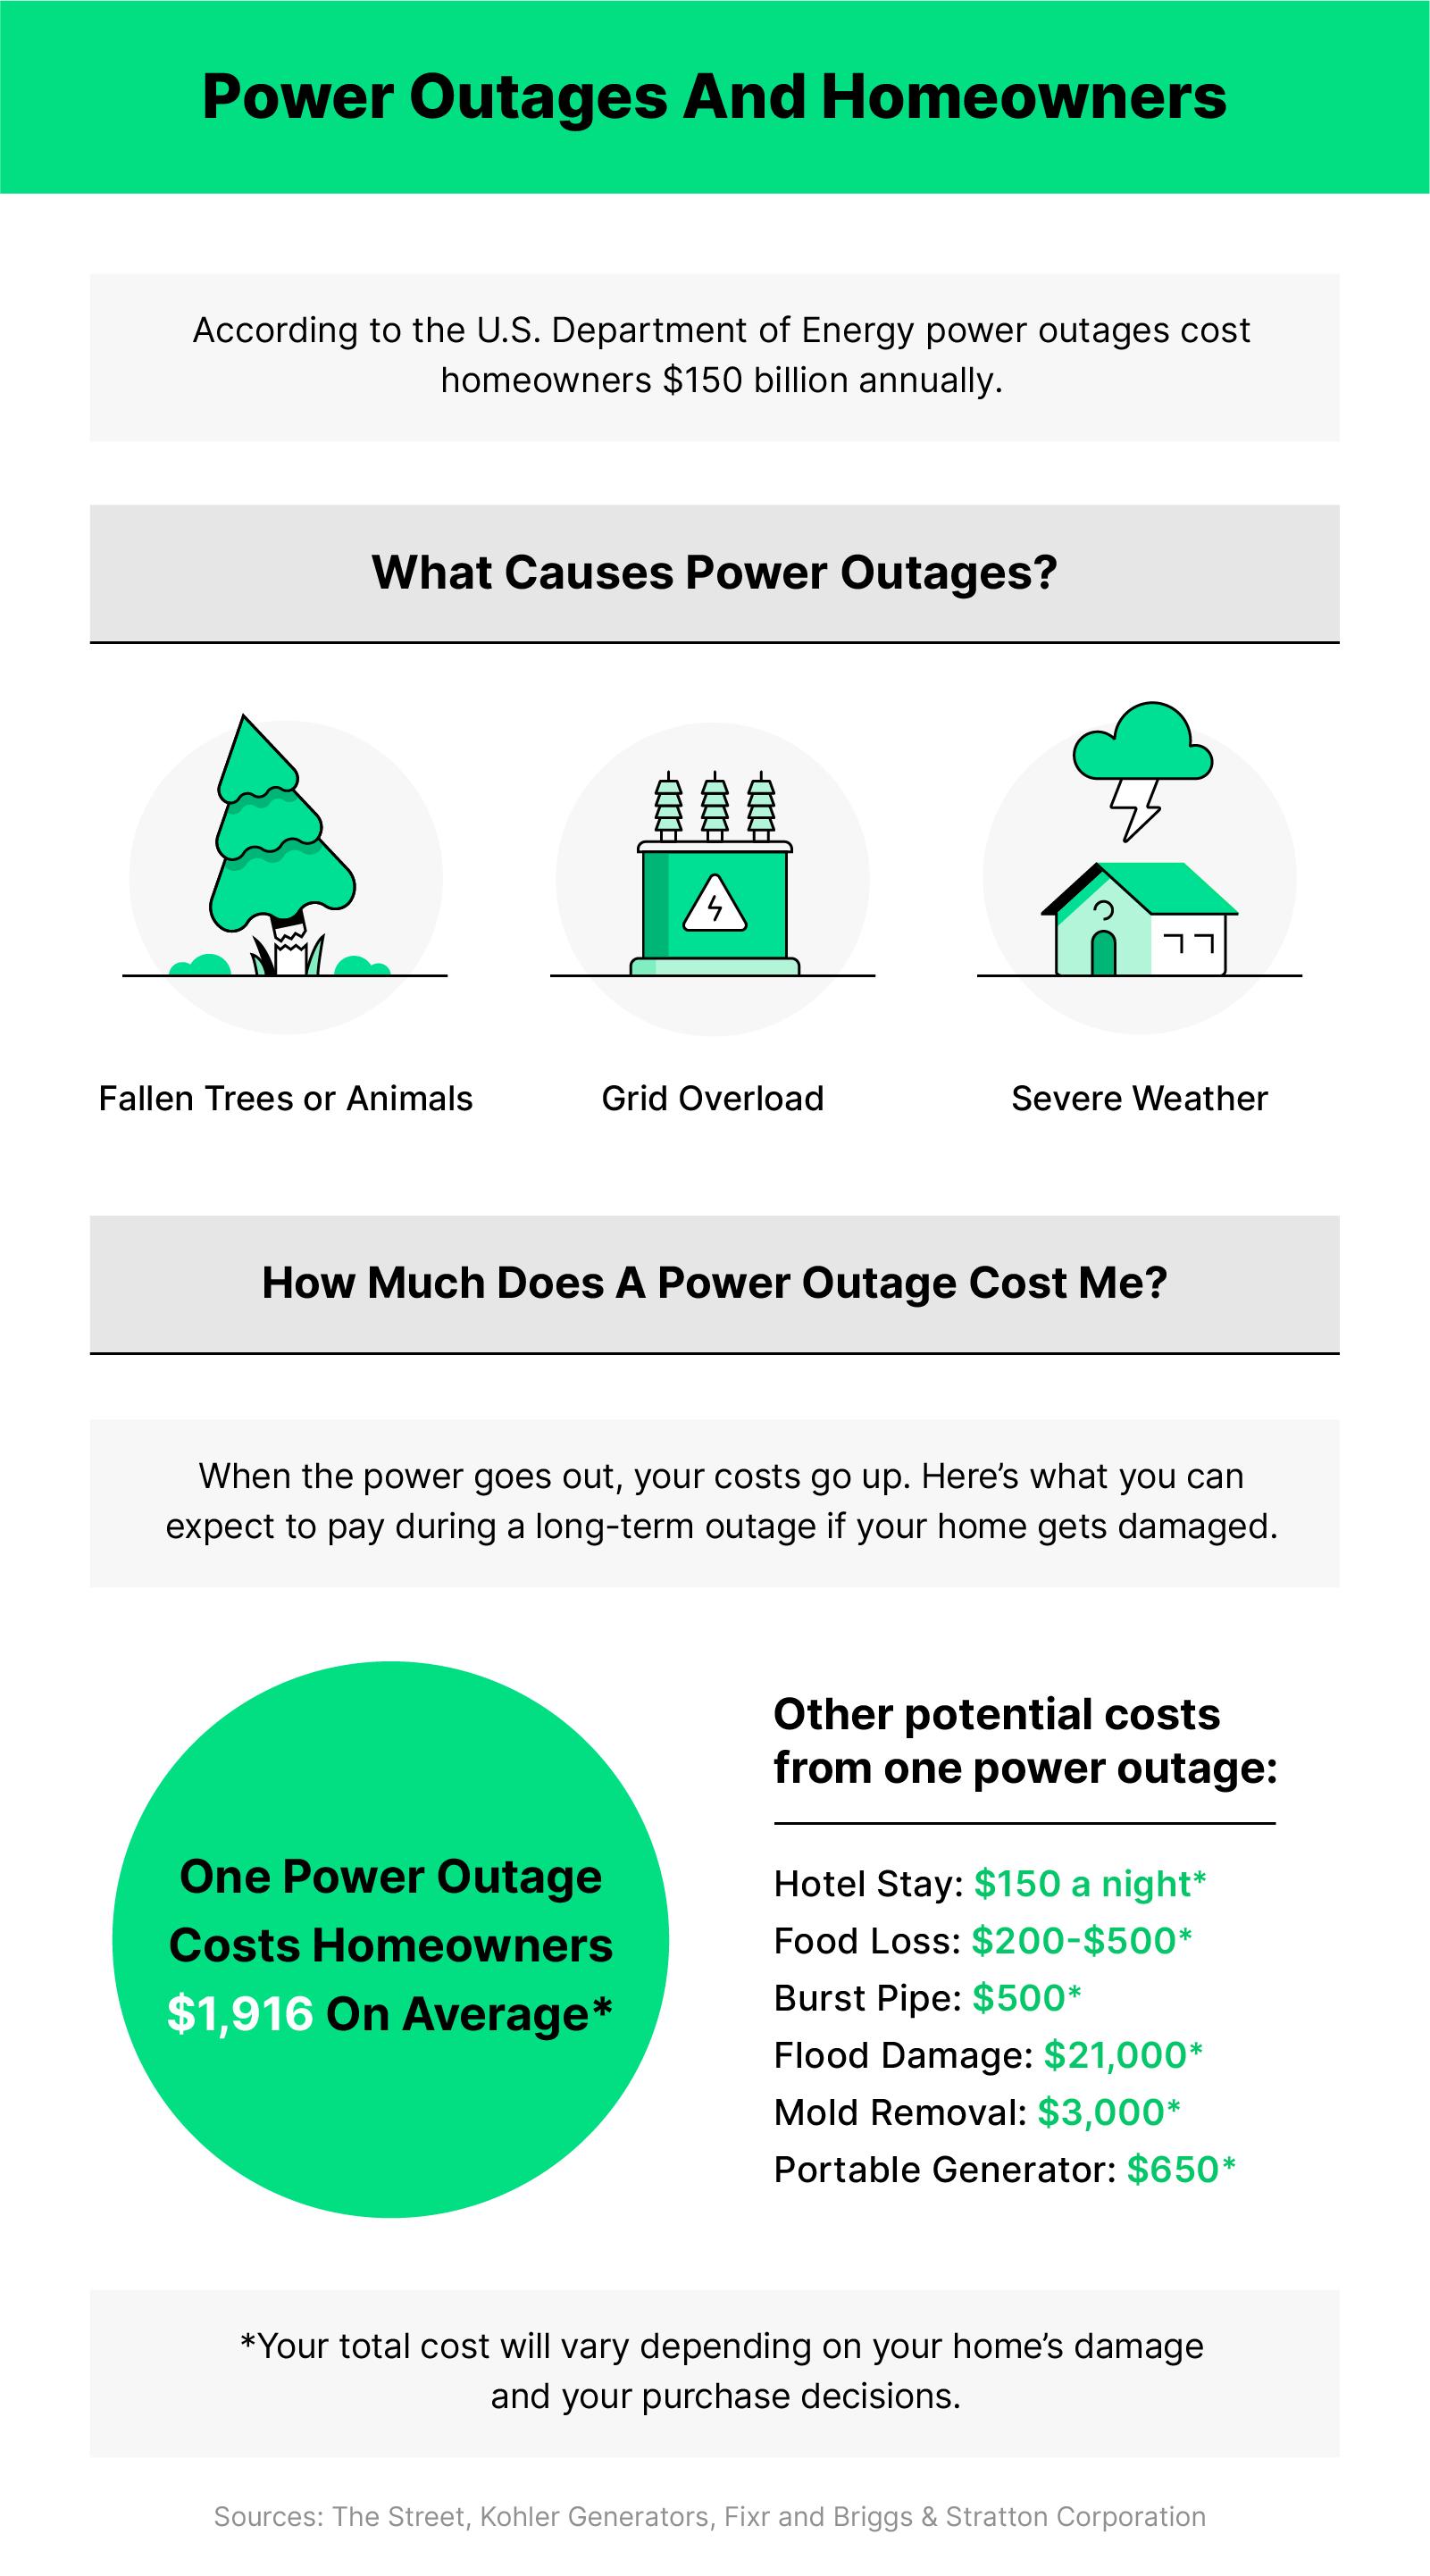 How can you prepare your home for a power outage?